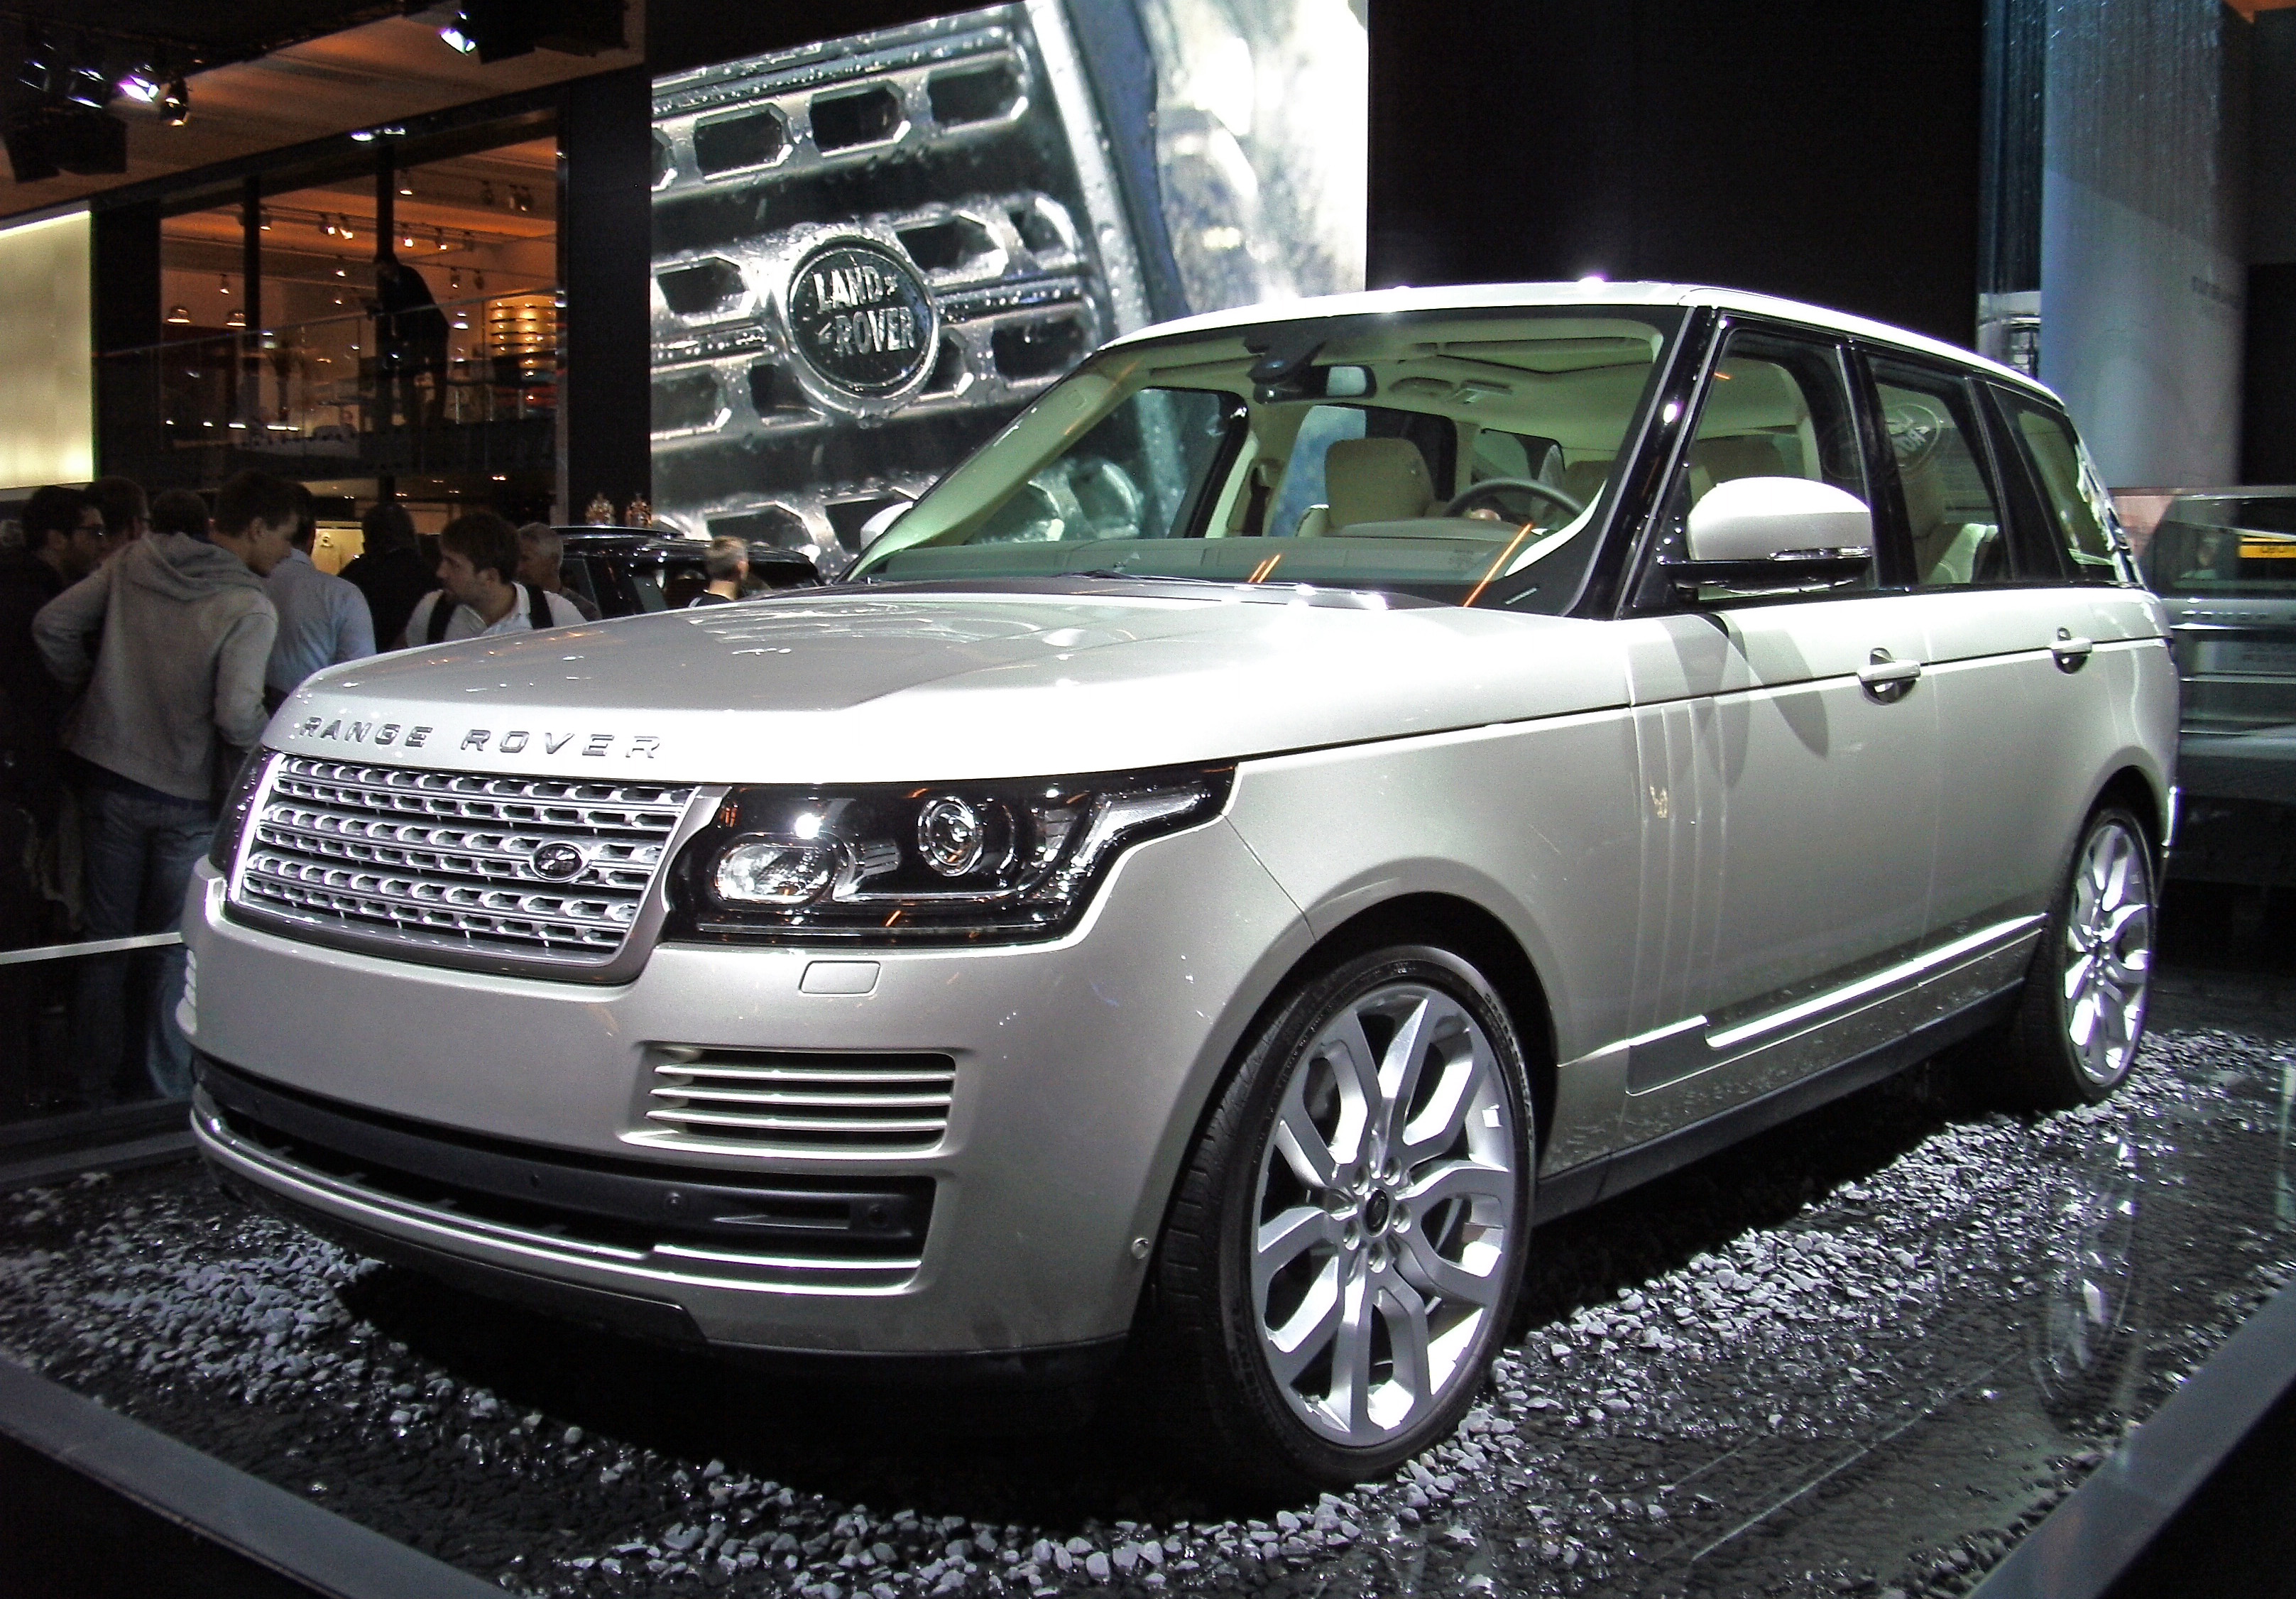 High Quality Tuning Files Land Rover Range Rover / Sport 5.0 Supercharged SVR 550hp